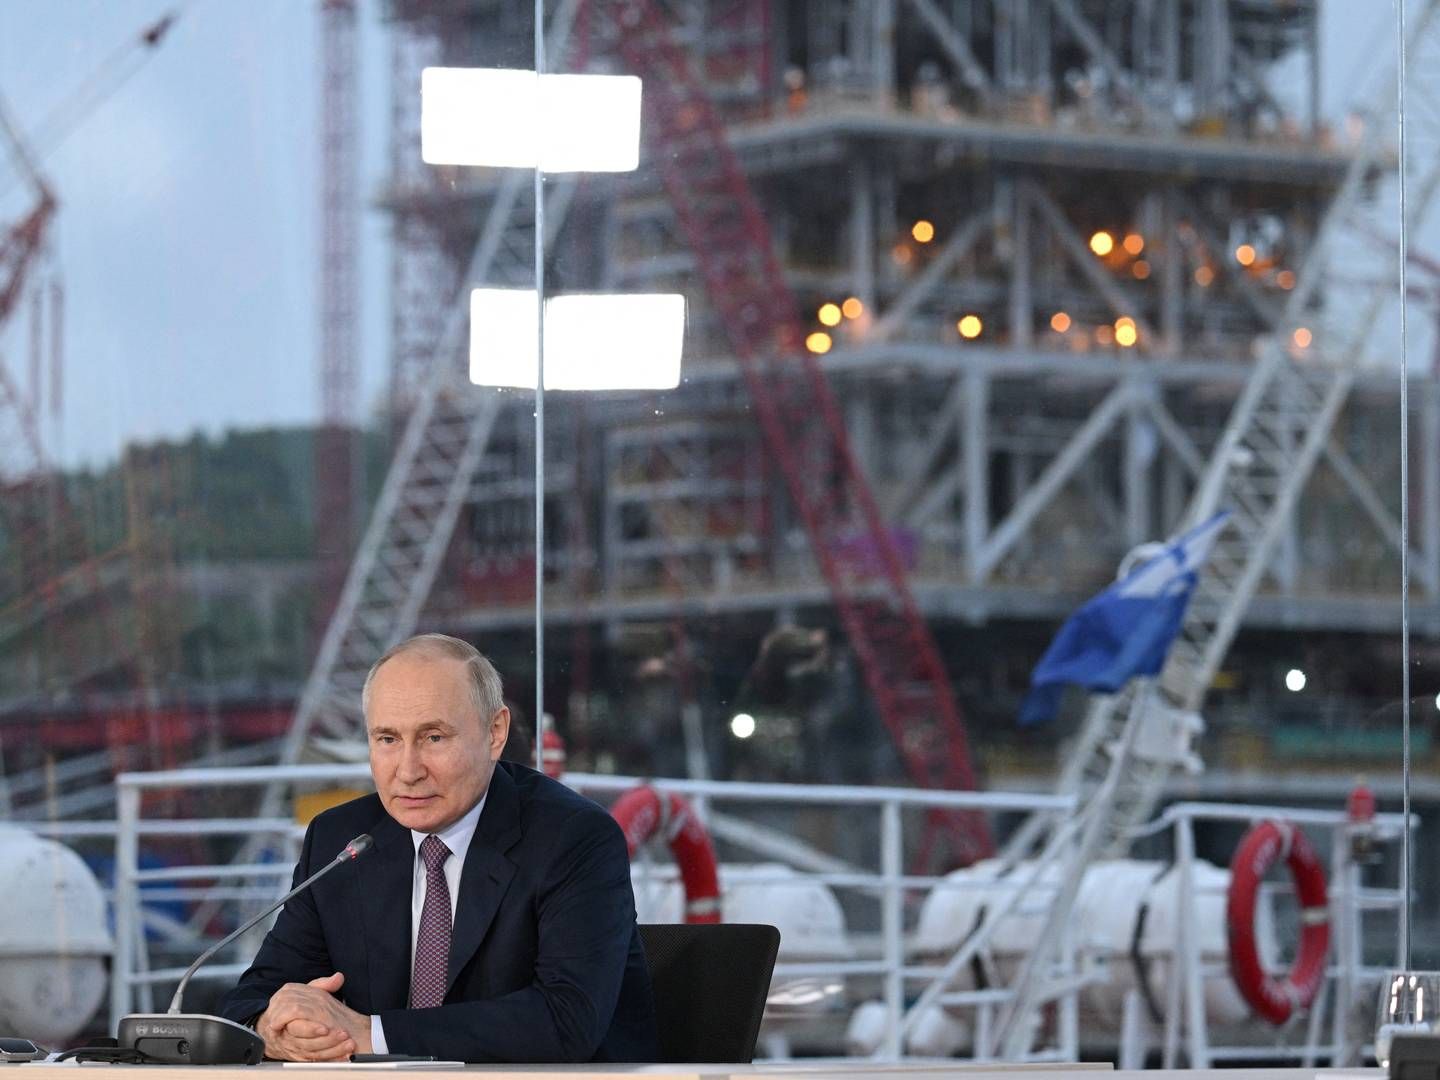 In July, Russian President Vladimir Putin visited the LNG "factory" Novatek, which has several long-term contracts with European companies. | Photo: Sputnik/Reuters/Ritzau Scanpix